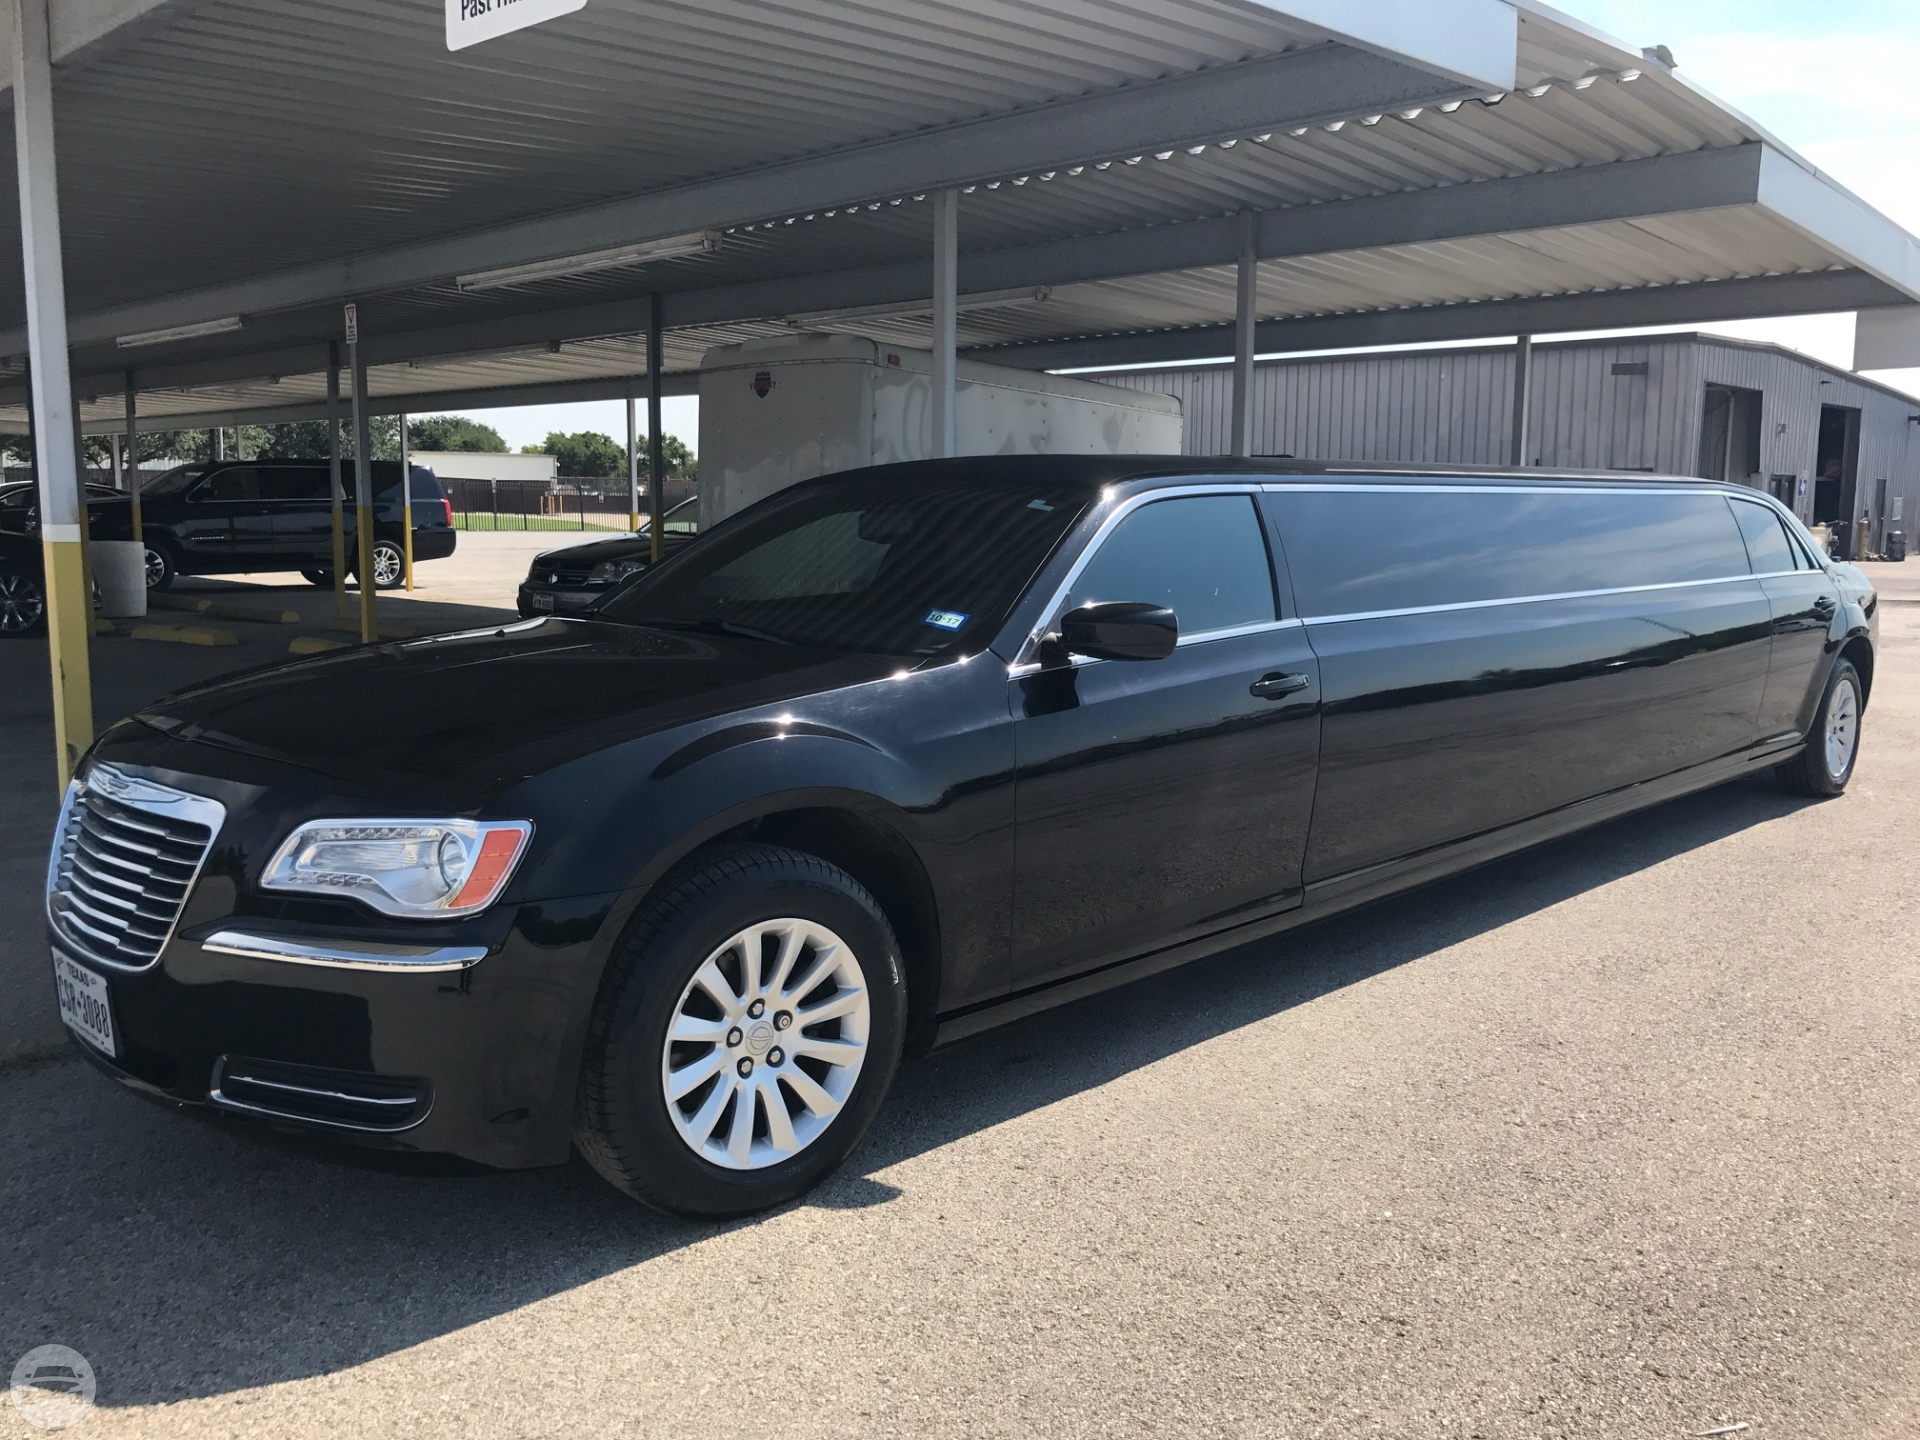 10 passenger stretch limousine
Limo /
Dallas, TX

 / Hourly $0.00
